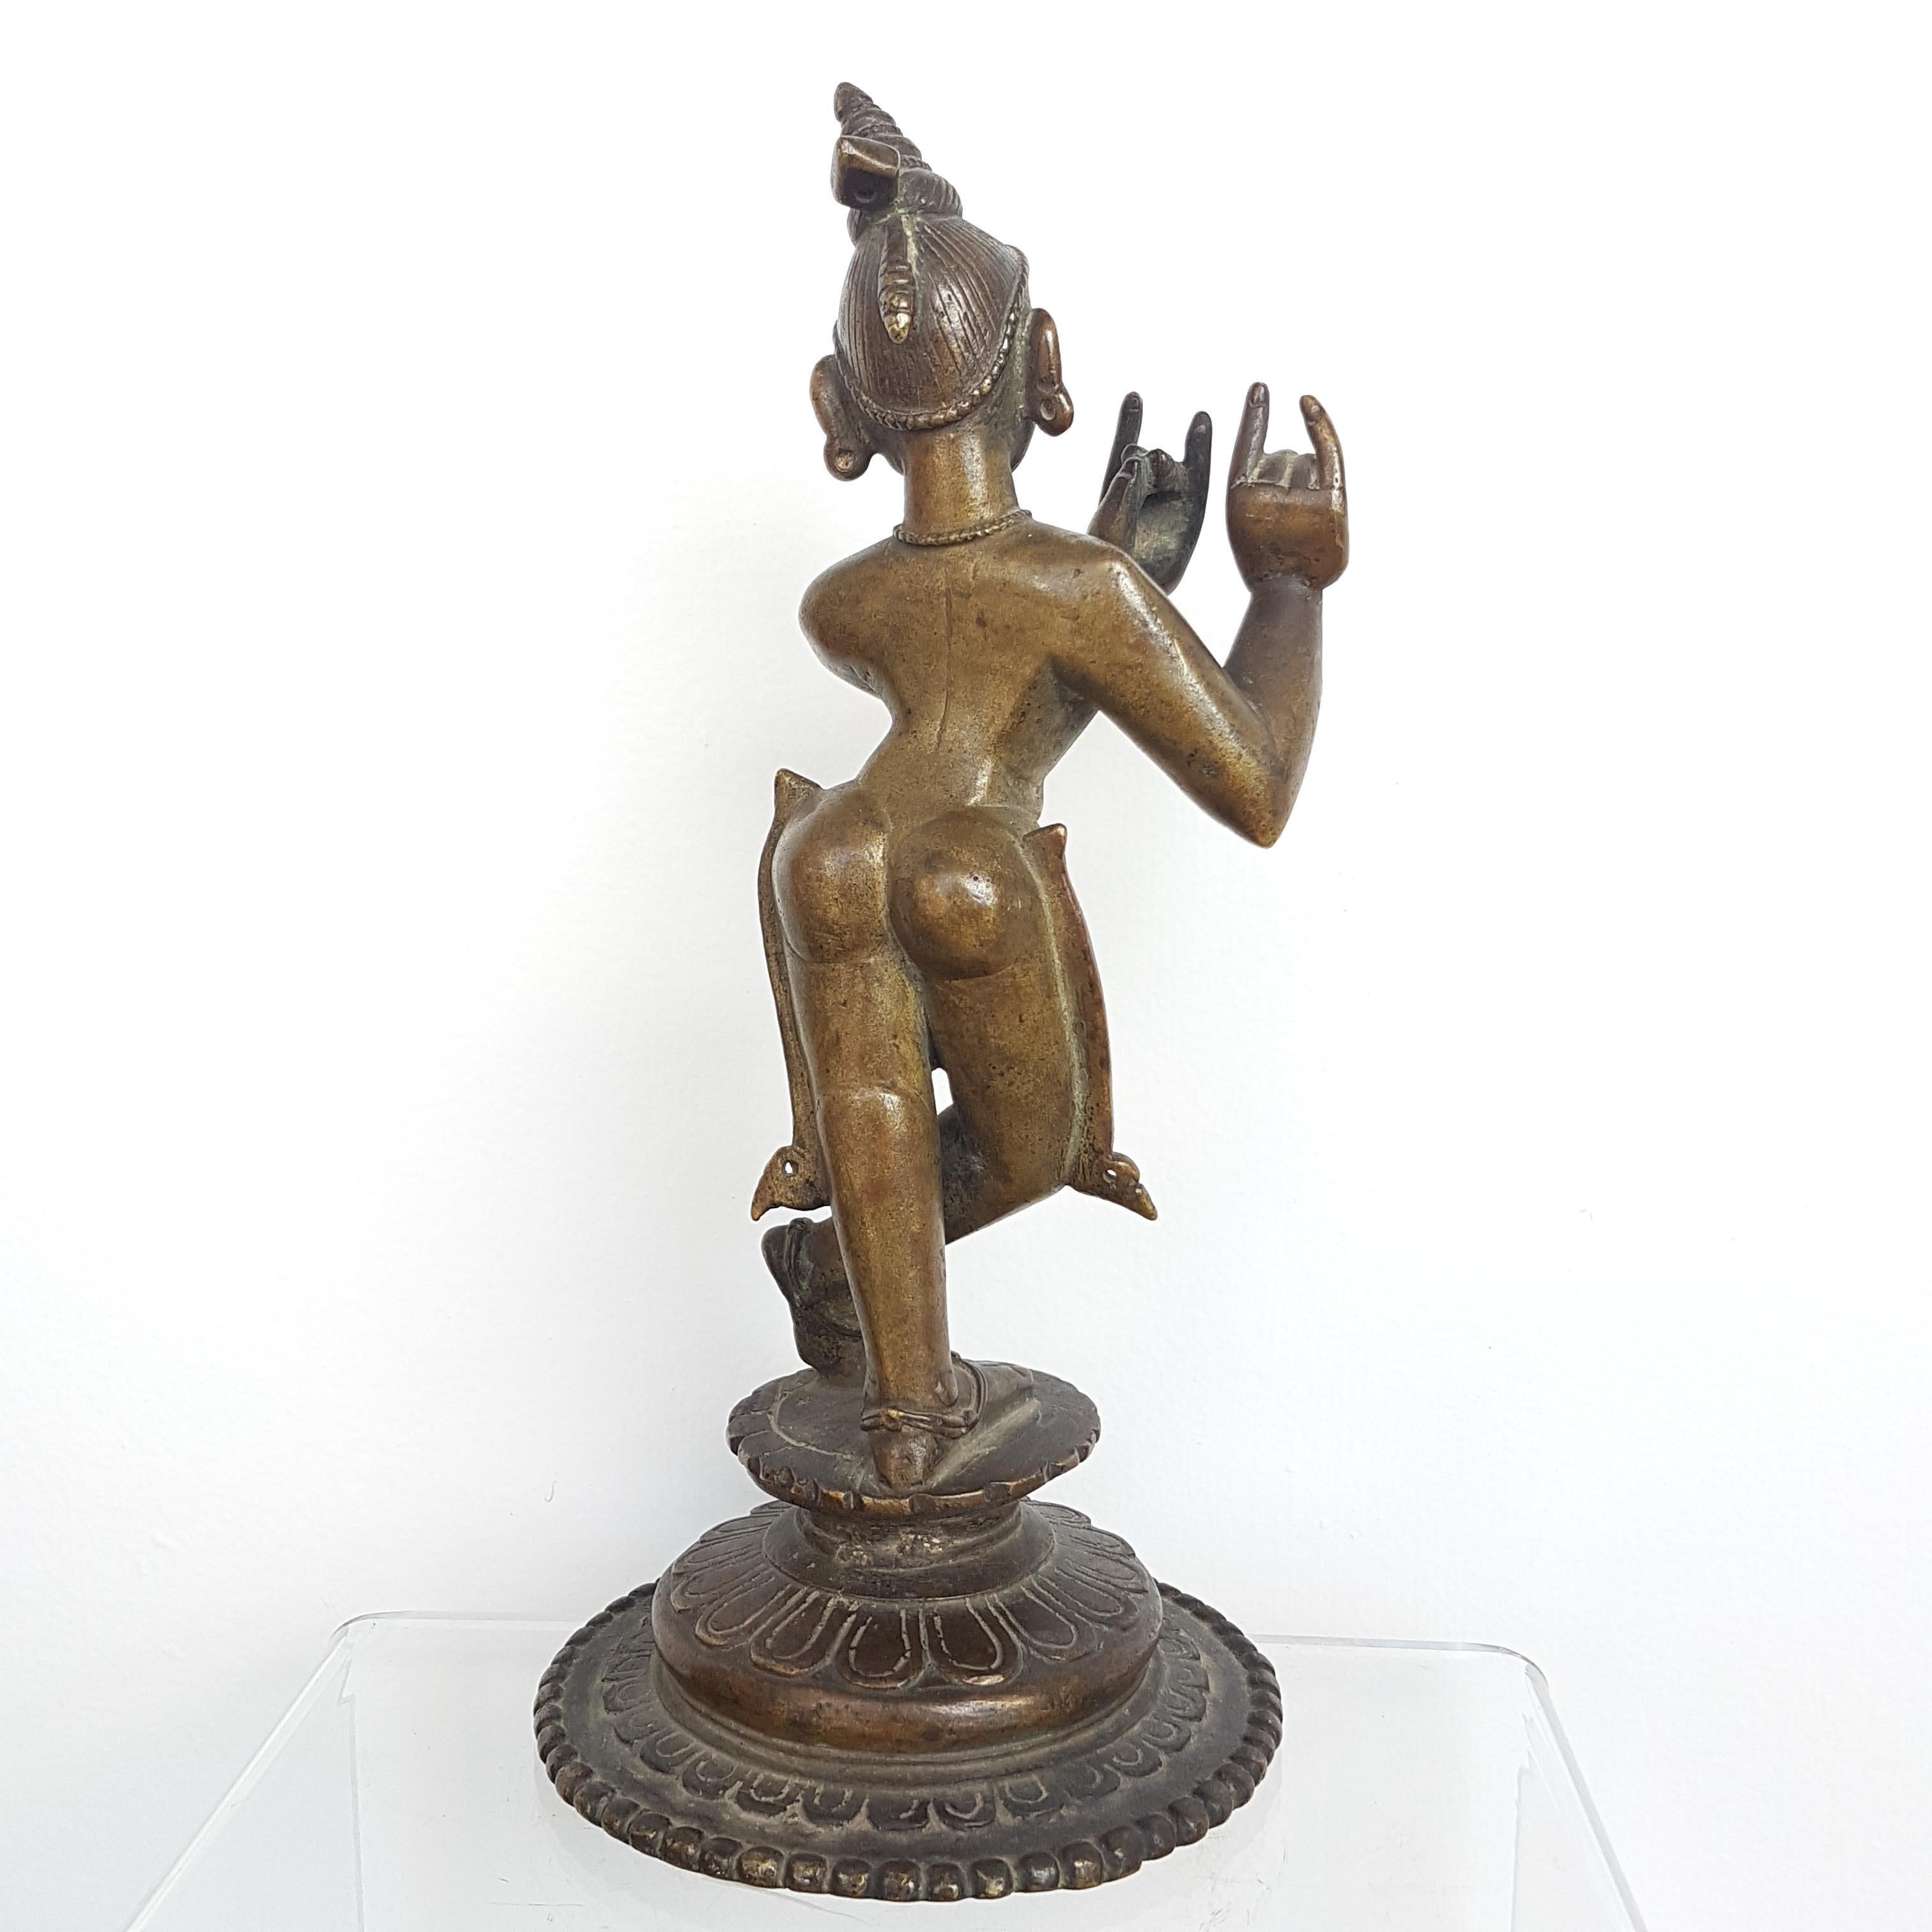 Elegant Krishna Venugopal, bronze figure from Orissa or Bengal, India 18th century. Made from Cire Perdue/(lost wax) technique. Height: 26 cm

Krishna is standing wearing a simple yet elegant Dhoti on a 3-tiered Lotus base, with the circumference